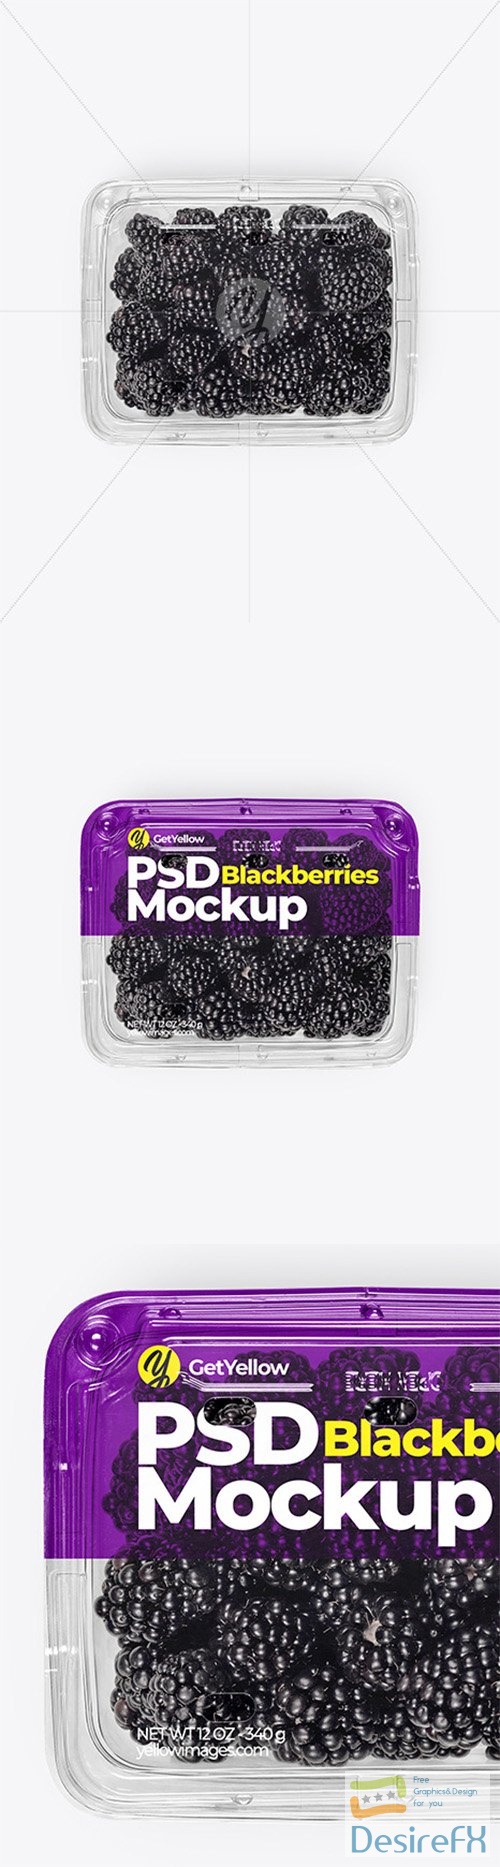 Clear Plastic Tray with Blackberries Mockup 69501 TIF